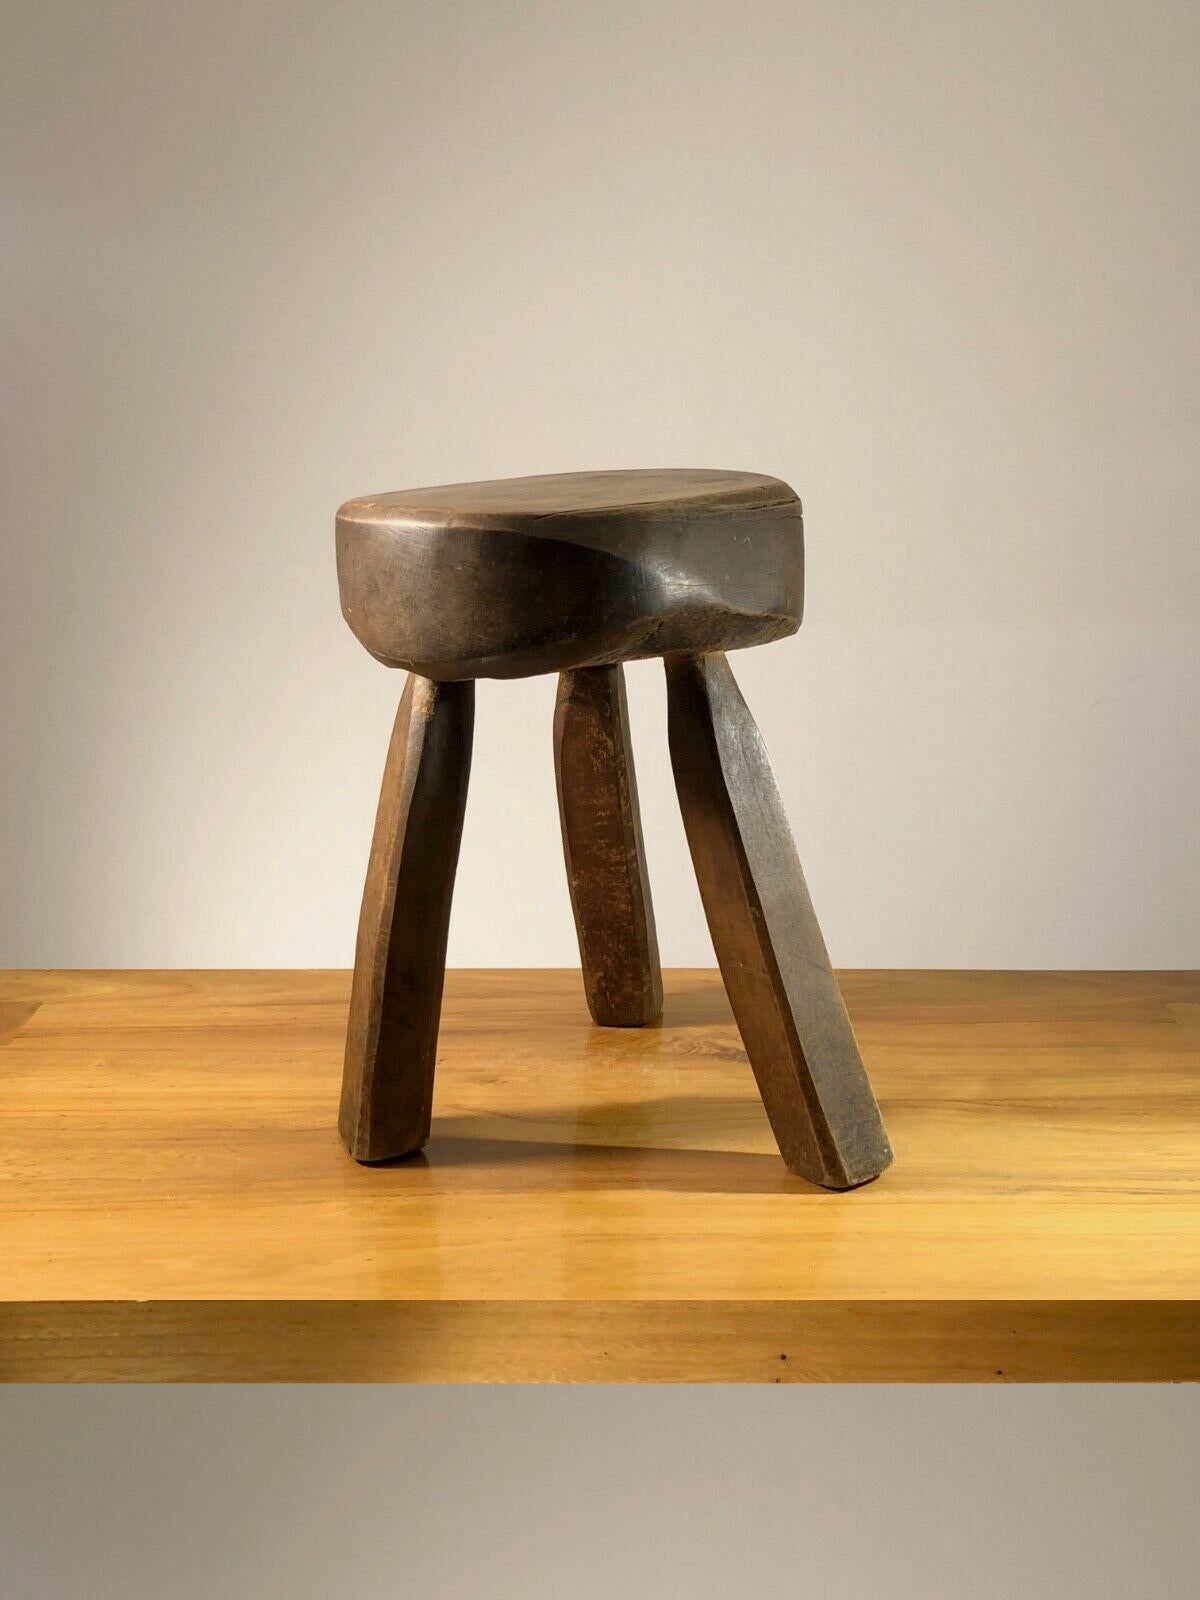 A sculptural and powerful tripod stool, Modernist, Brutalist, Popular Art, in solid wood carved in a sensual and irregular way, in the spirit of Jean Touret & Artisans de Marolles, to be attributed, France 1950.

DIMENSIONS: 37 x 30 x 24